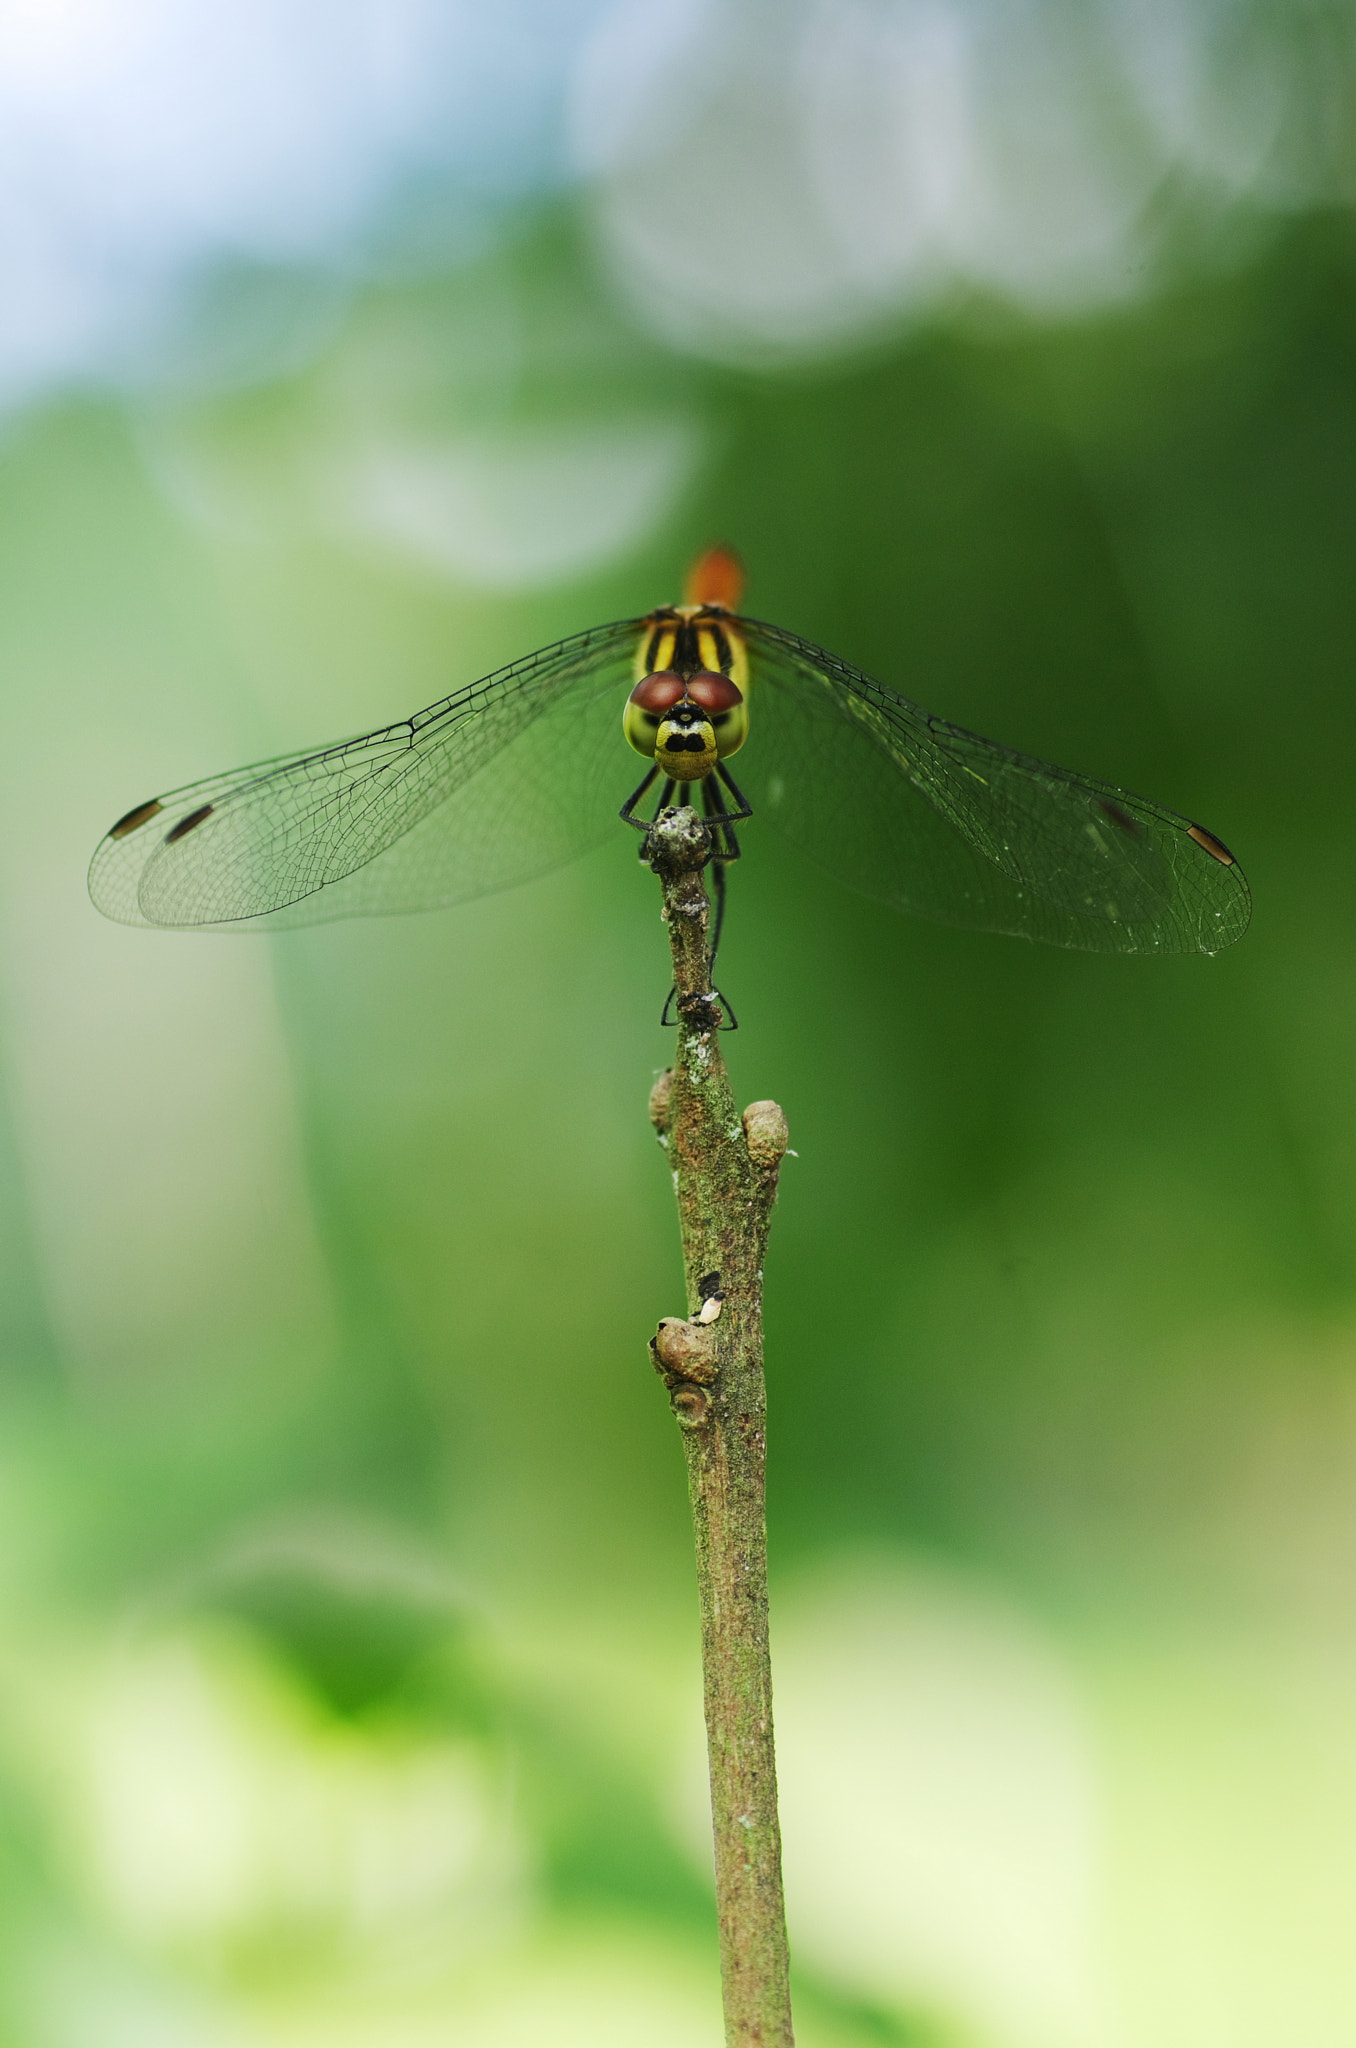 Pentax K-5 sample photo. A dragonfly photography